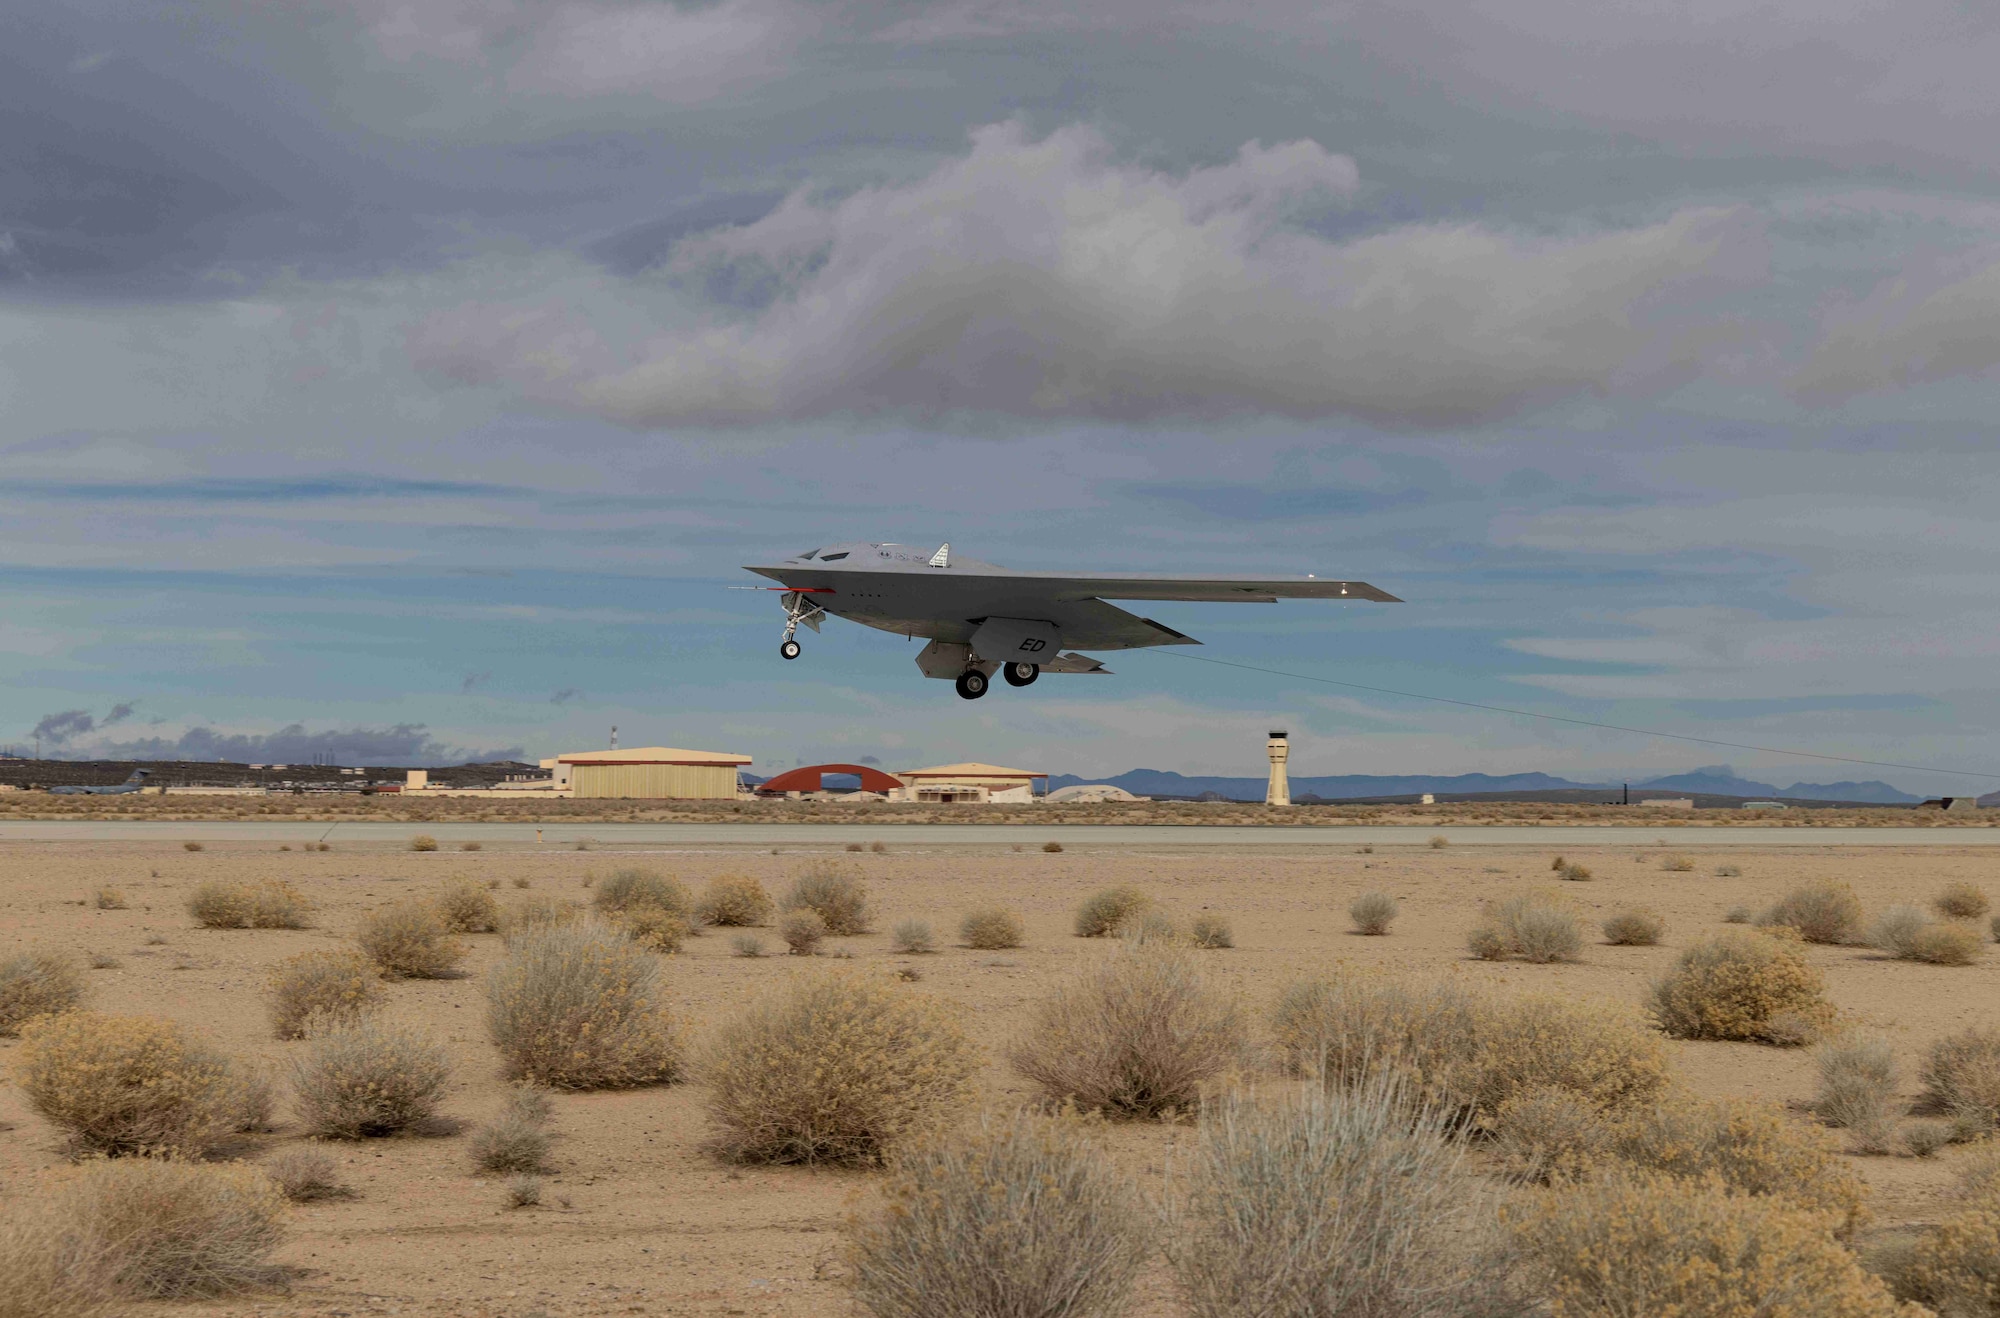 -A B-21 Raider conducts flight tests, which includes ground testing, taxiing, and flying operations, at Edwards Air Force Base, California, where it continues to make progress toward becoming the backbone of the U.S. Air Force bomber fleet. (Courtesy photo)